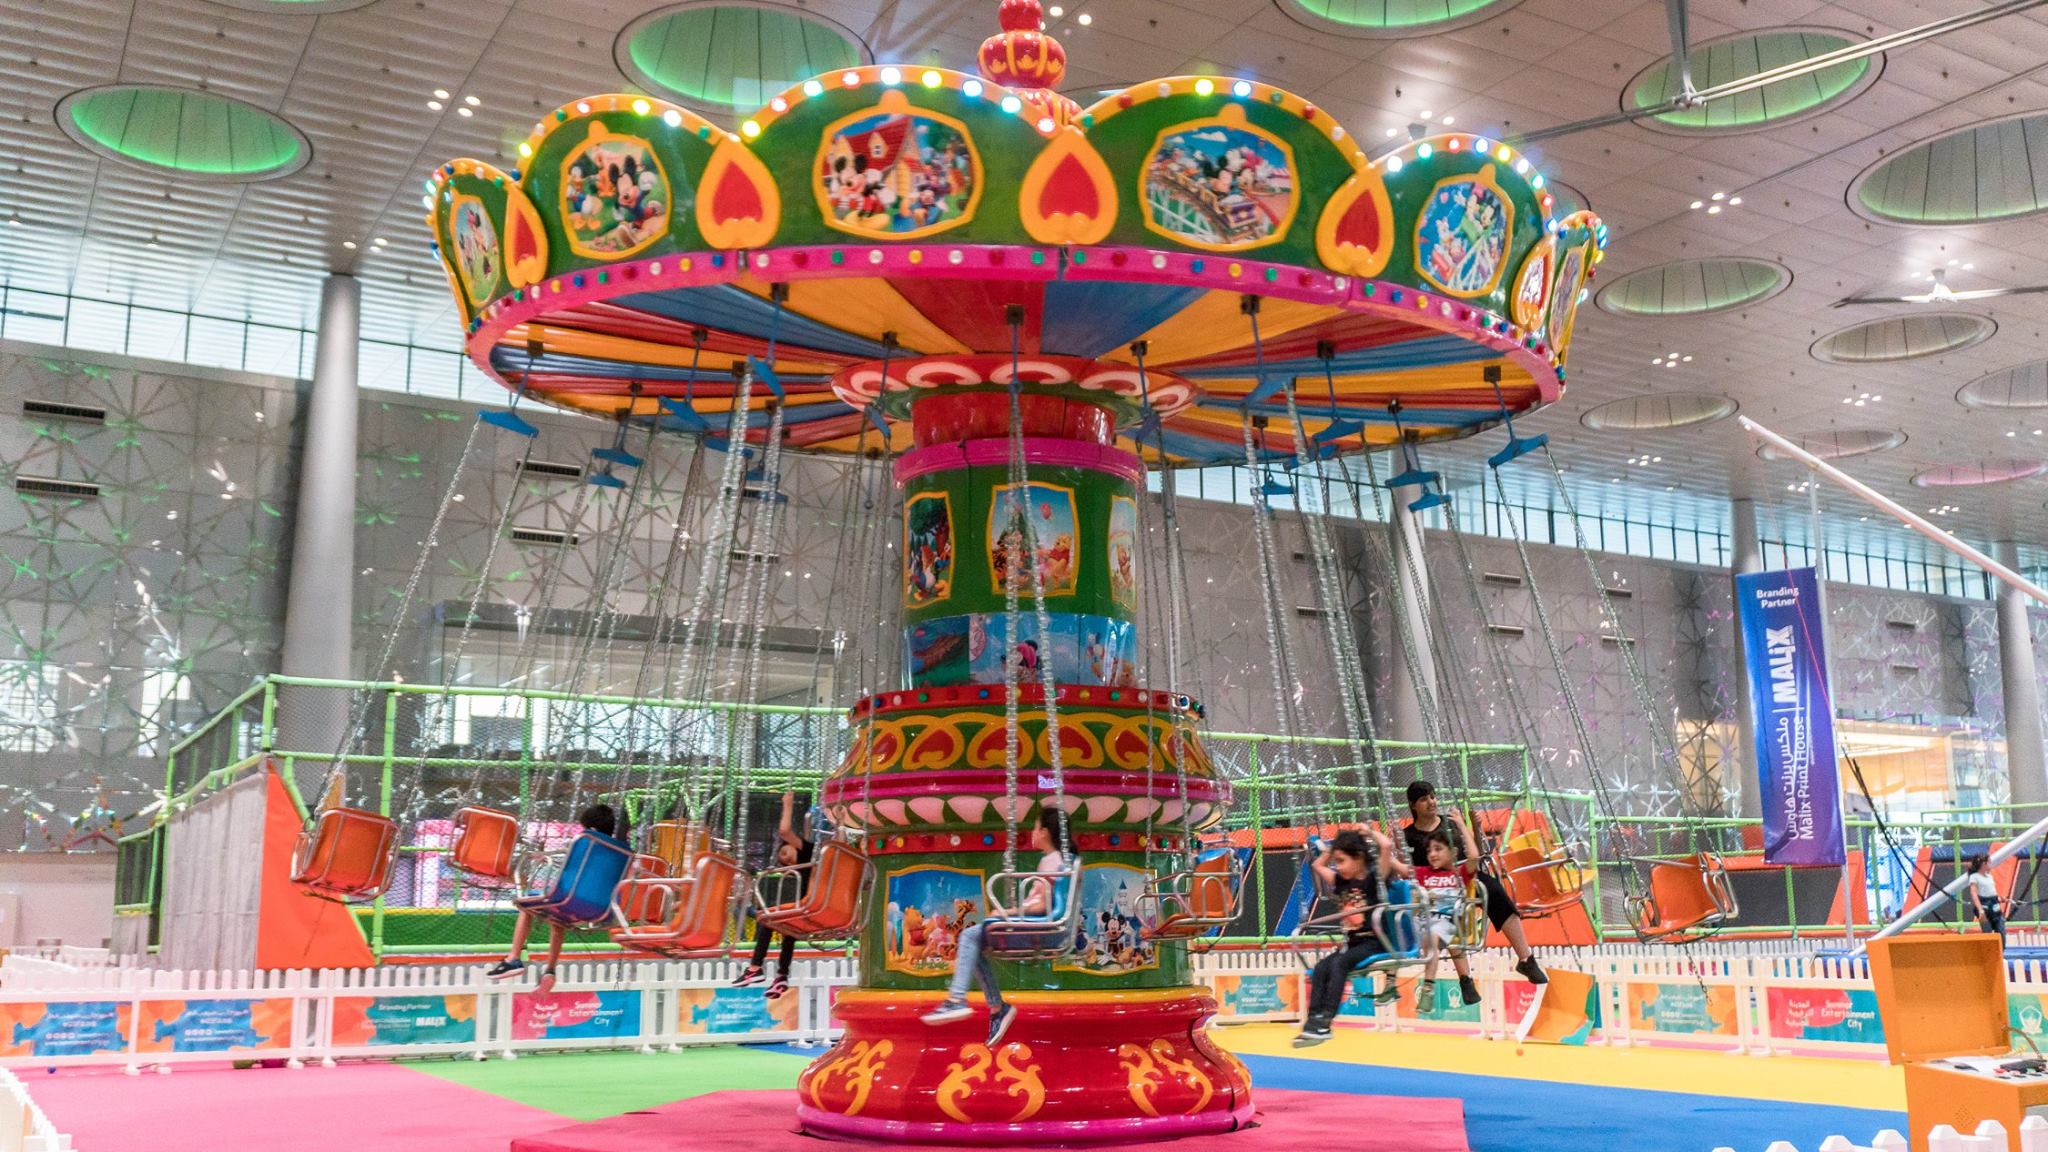 Colour your summer at Summer Entertainment City Doha – A world of fun activities and games for all!